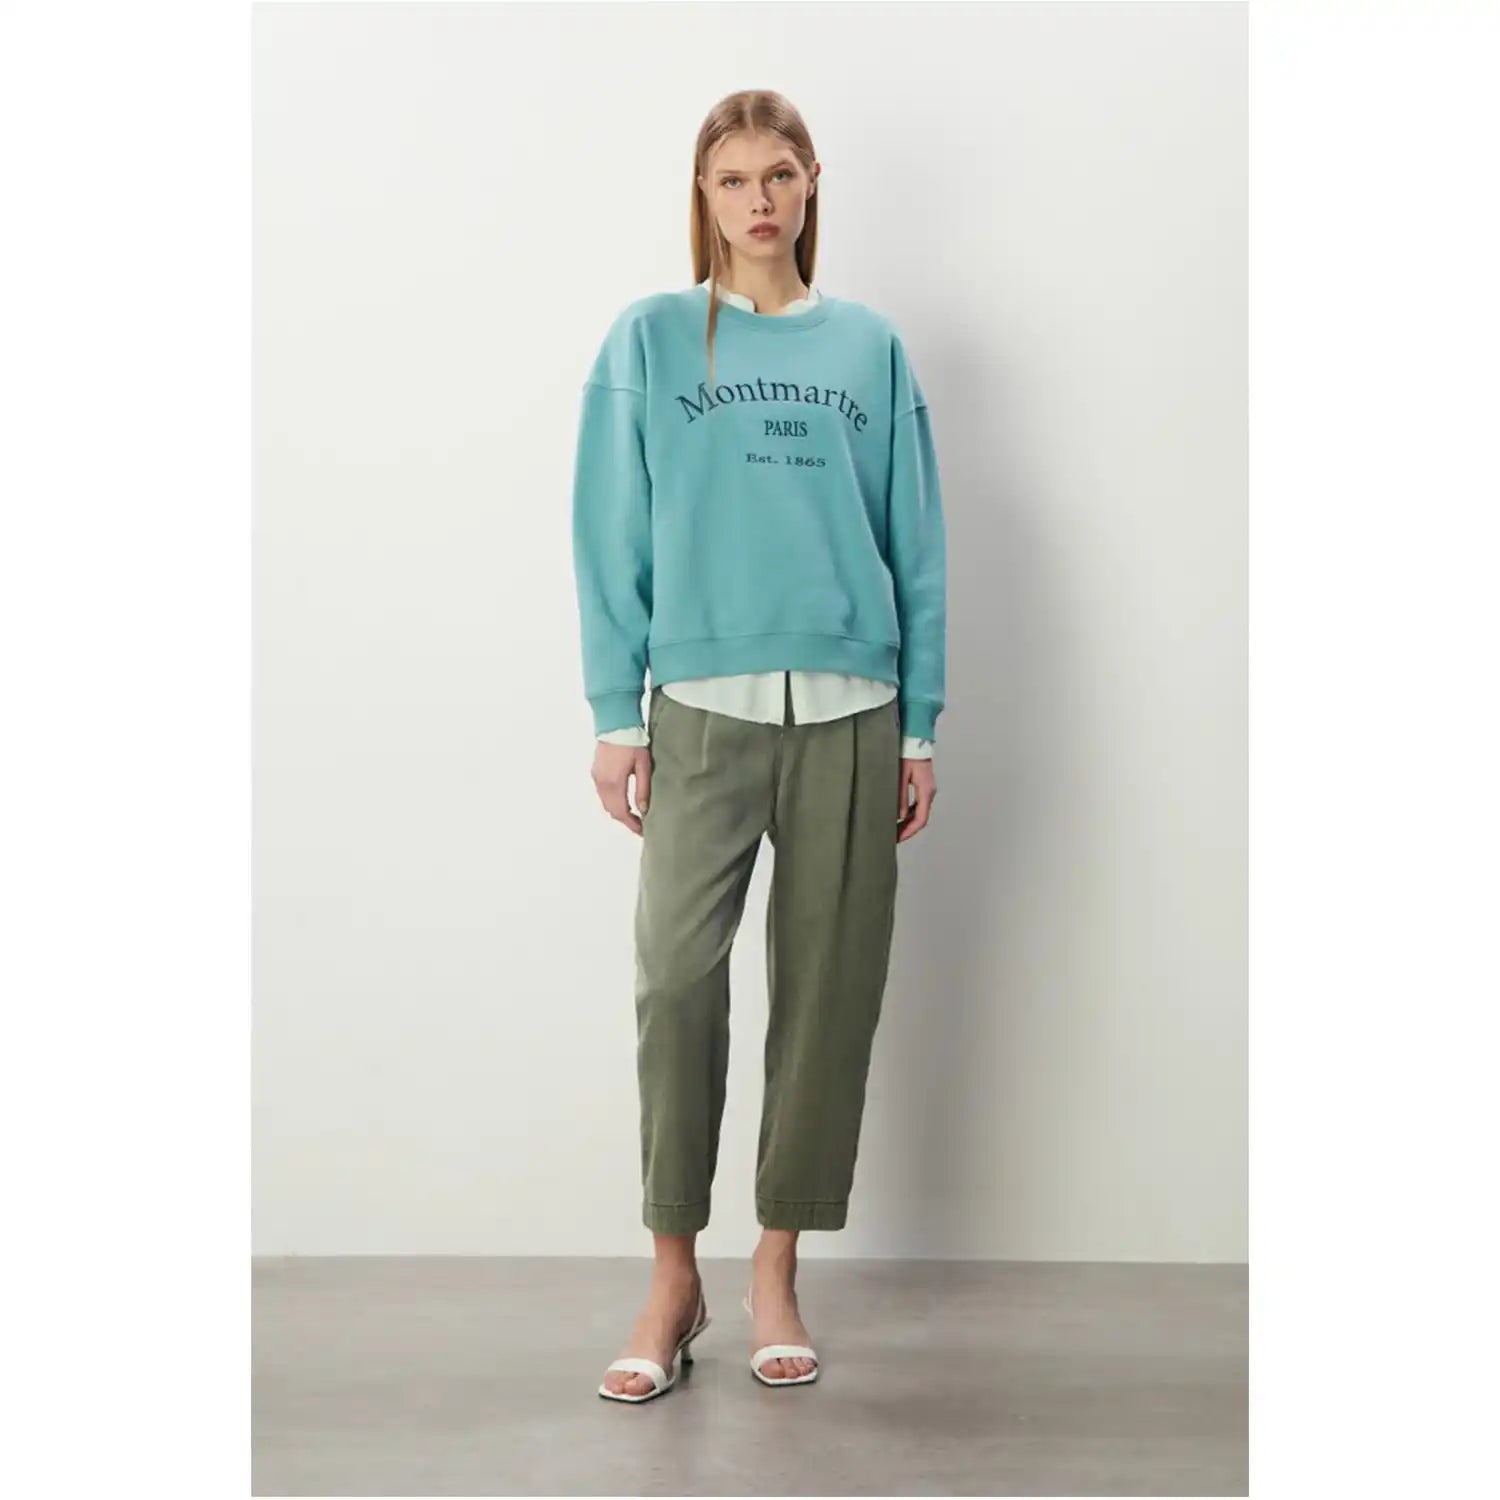 Sfera Embroidered Sweatshirt - Teal 4 Shaws Department Stores